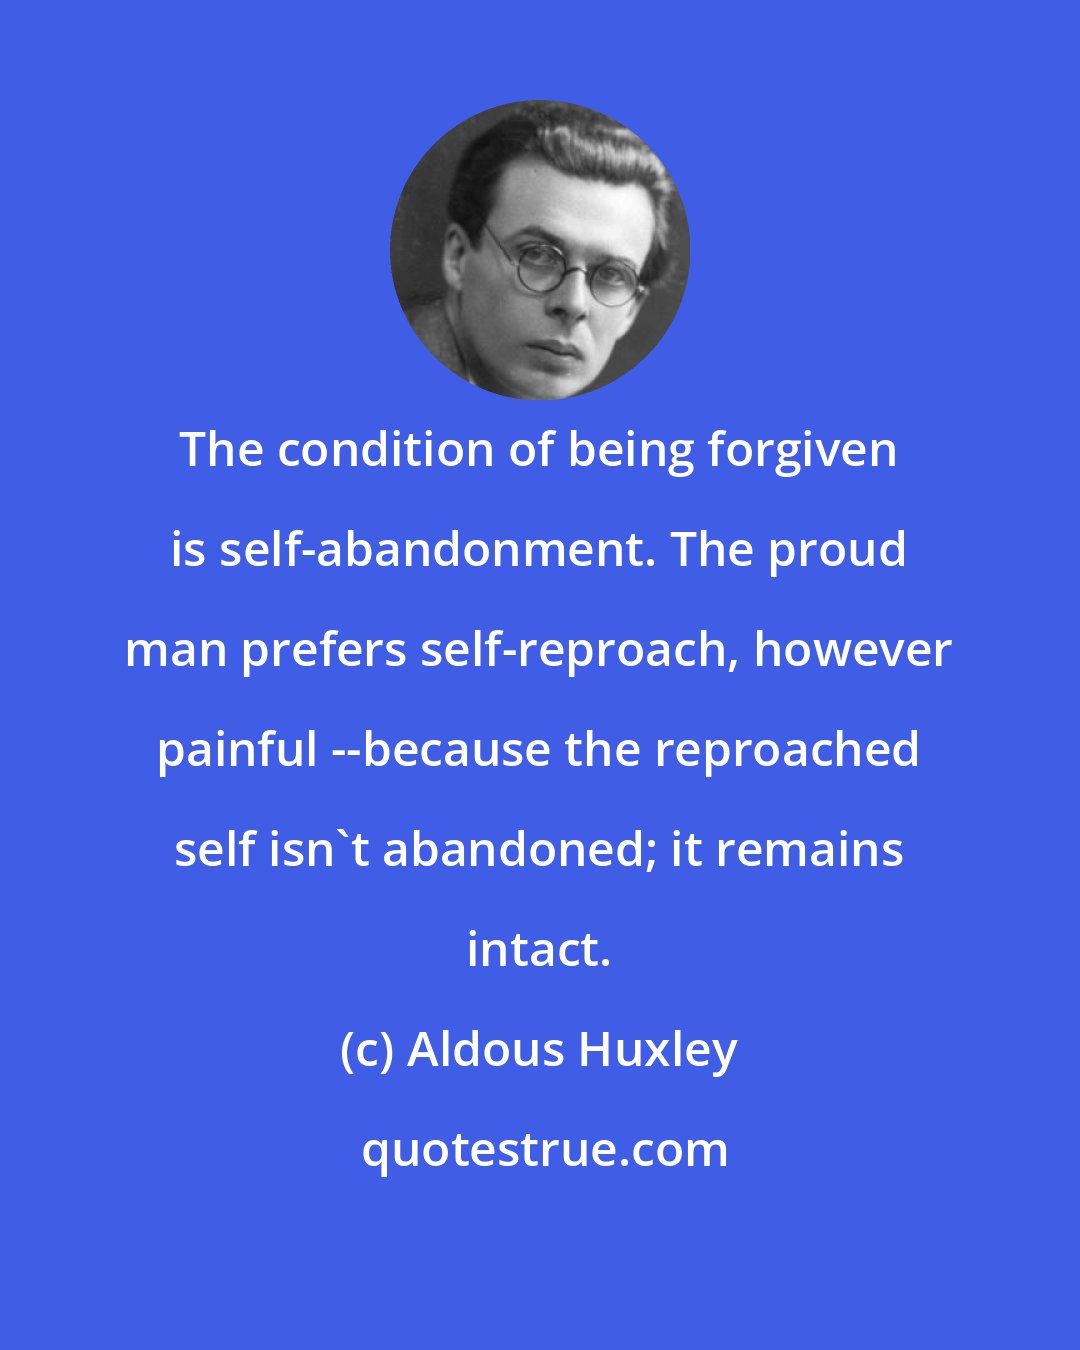 Aldous Huxley: The condition of being forgiven is self-abandonment. The proud man prefers self-reproach, however painful --because the reproached self isn't abandoned; it remains intact.